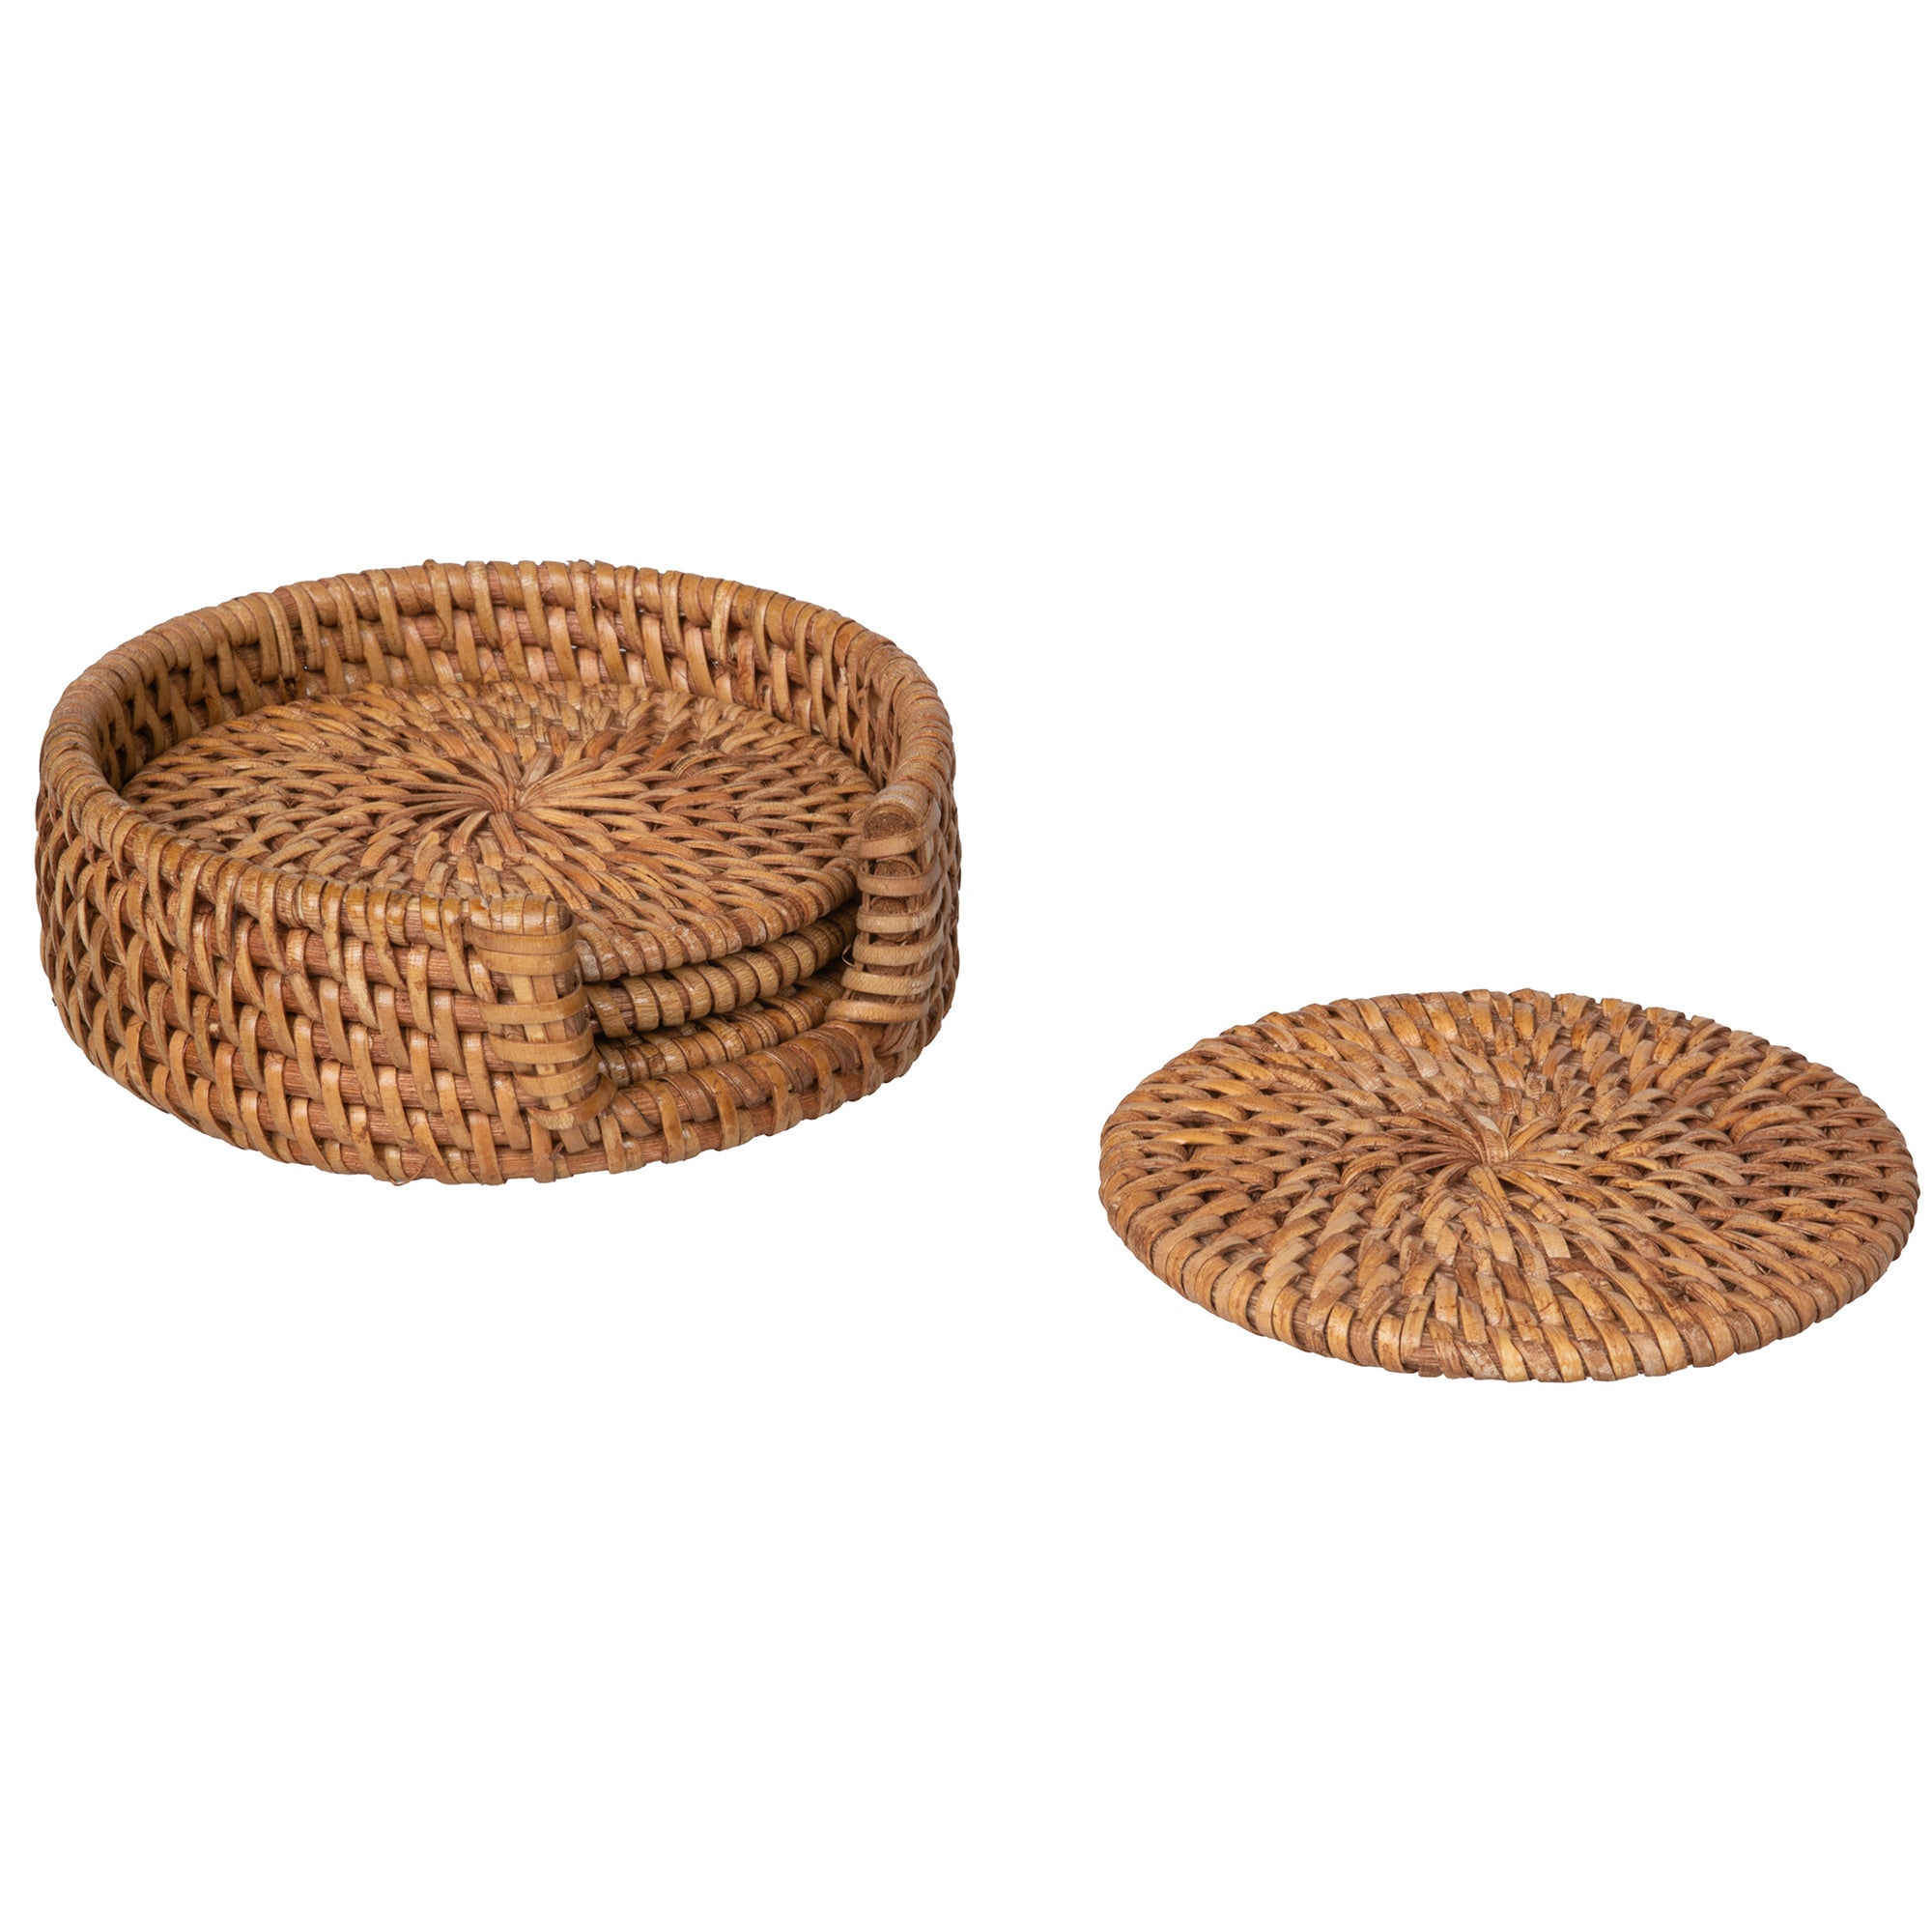 6 Pcs Rustic Coasters Wicker Coasters Rattan Coaster Wooden Round Straw  Woven Trivet Bamboo Coaster Holder Office - AliExpress